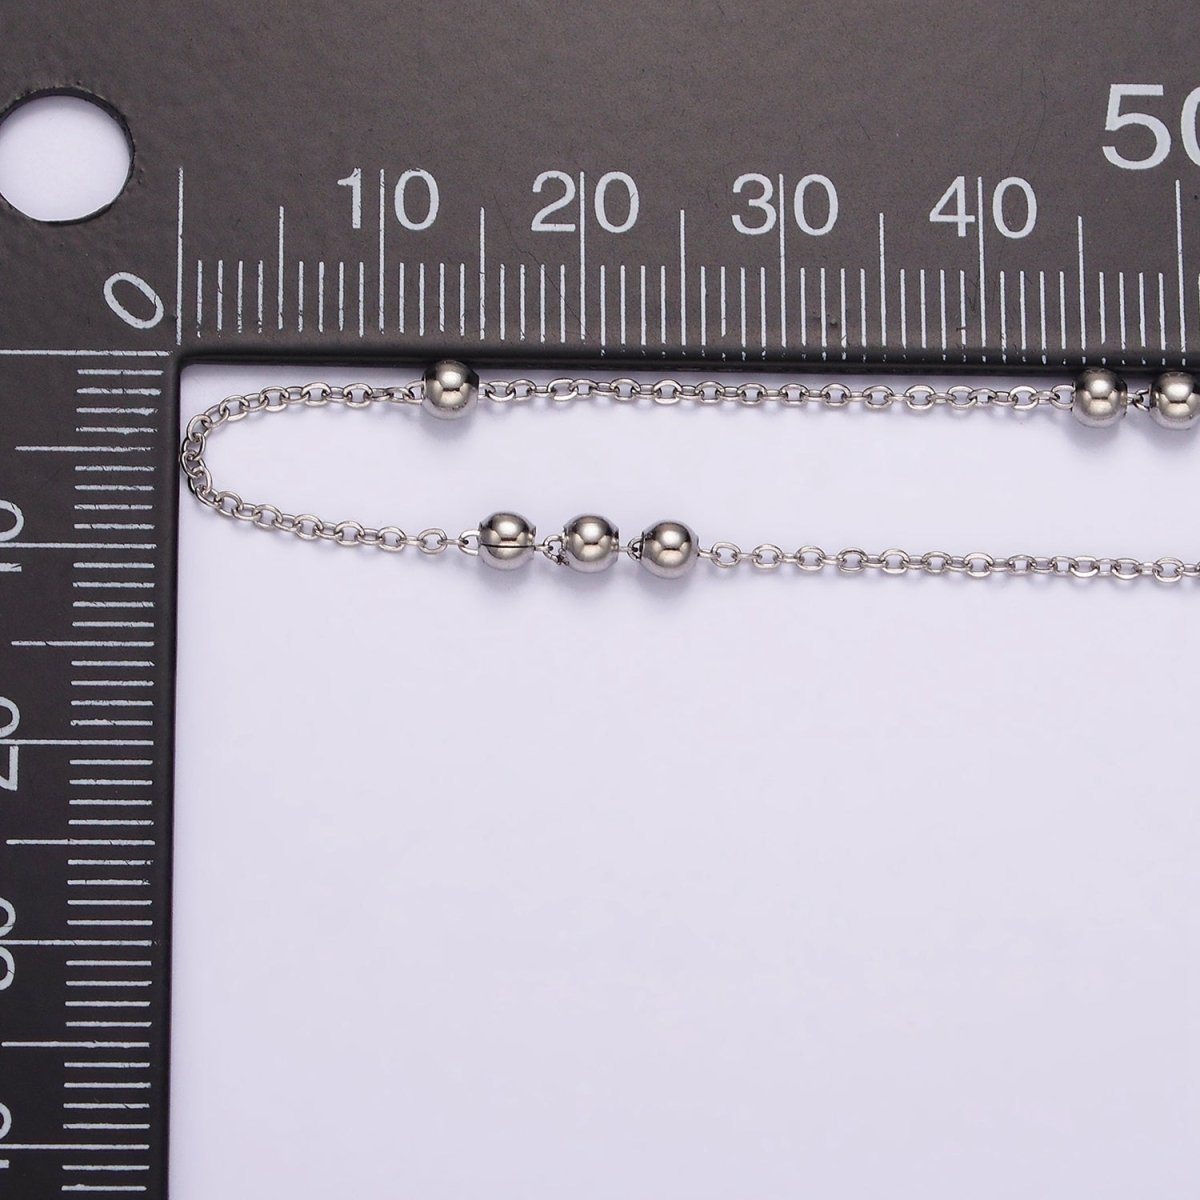 18inch Satellite Chain Necklace Silver Dainty Satellite Ball Chain Necklaces Stainless Steel | WA-2394 - DLUXCA